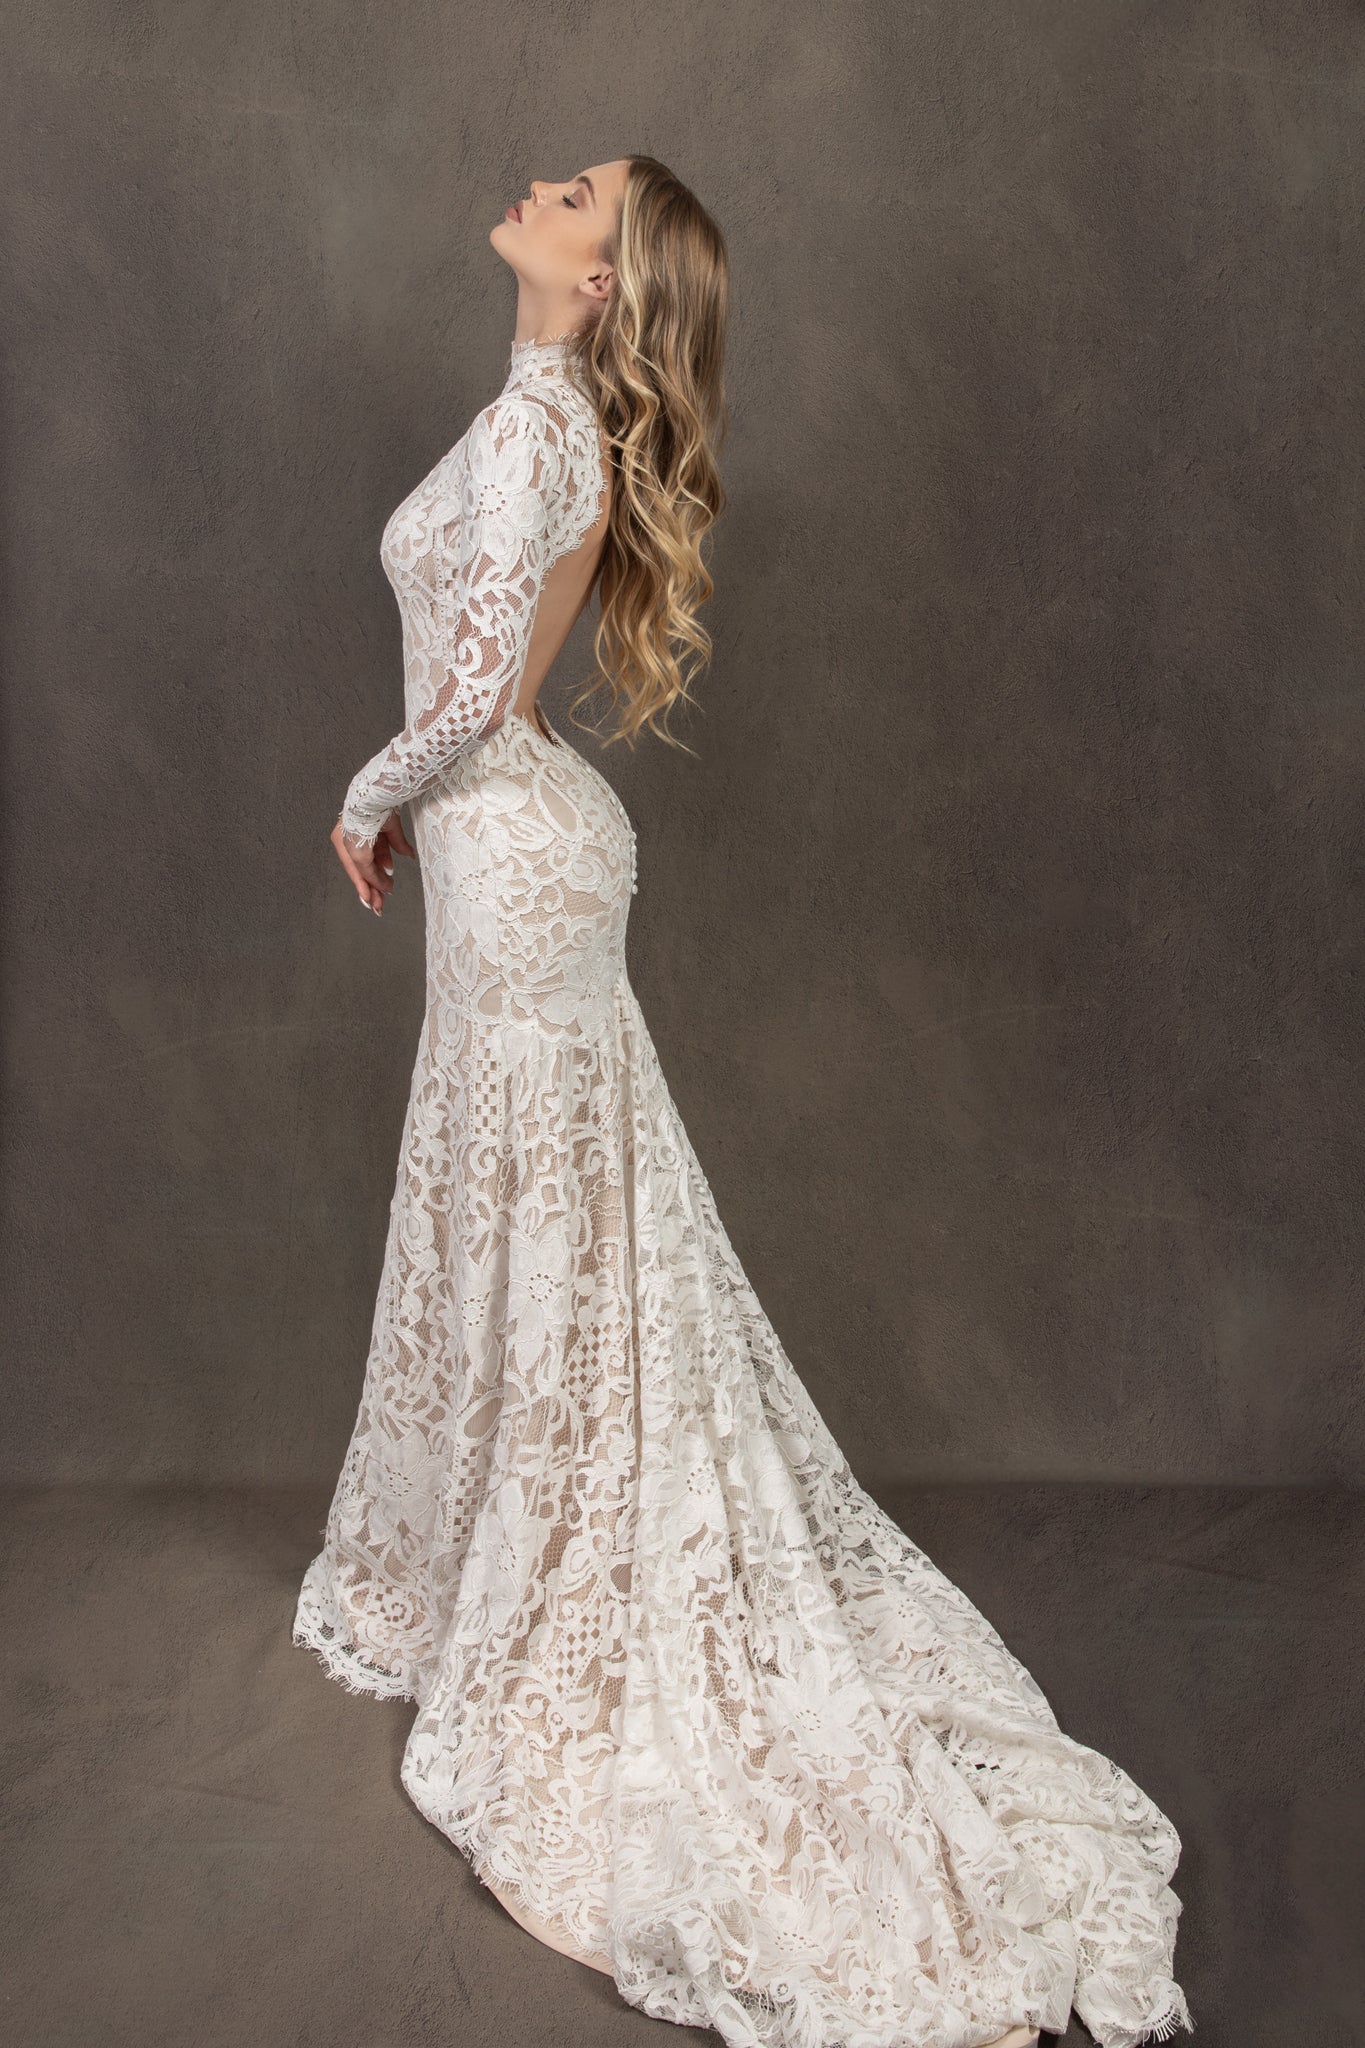 Bohemian lace wedding dress with turtleneck, open back and long sleevess.